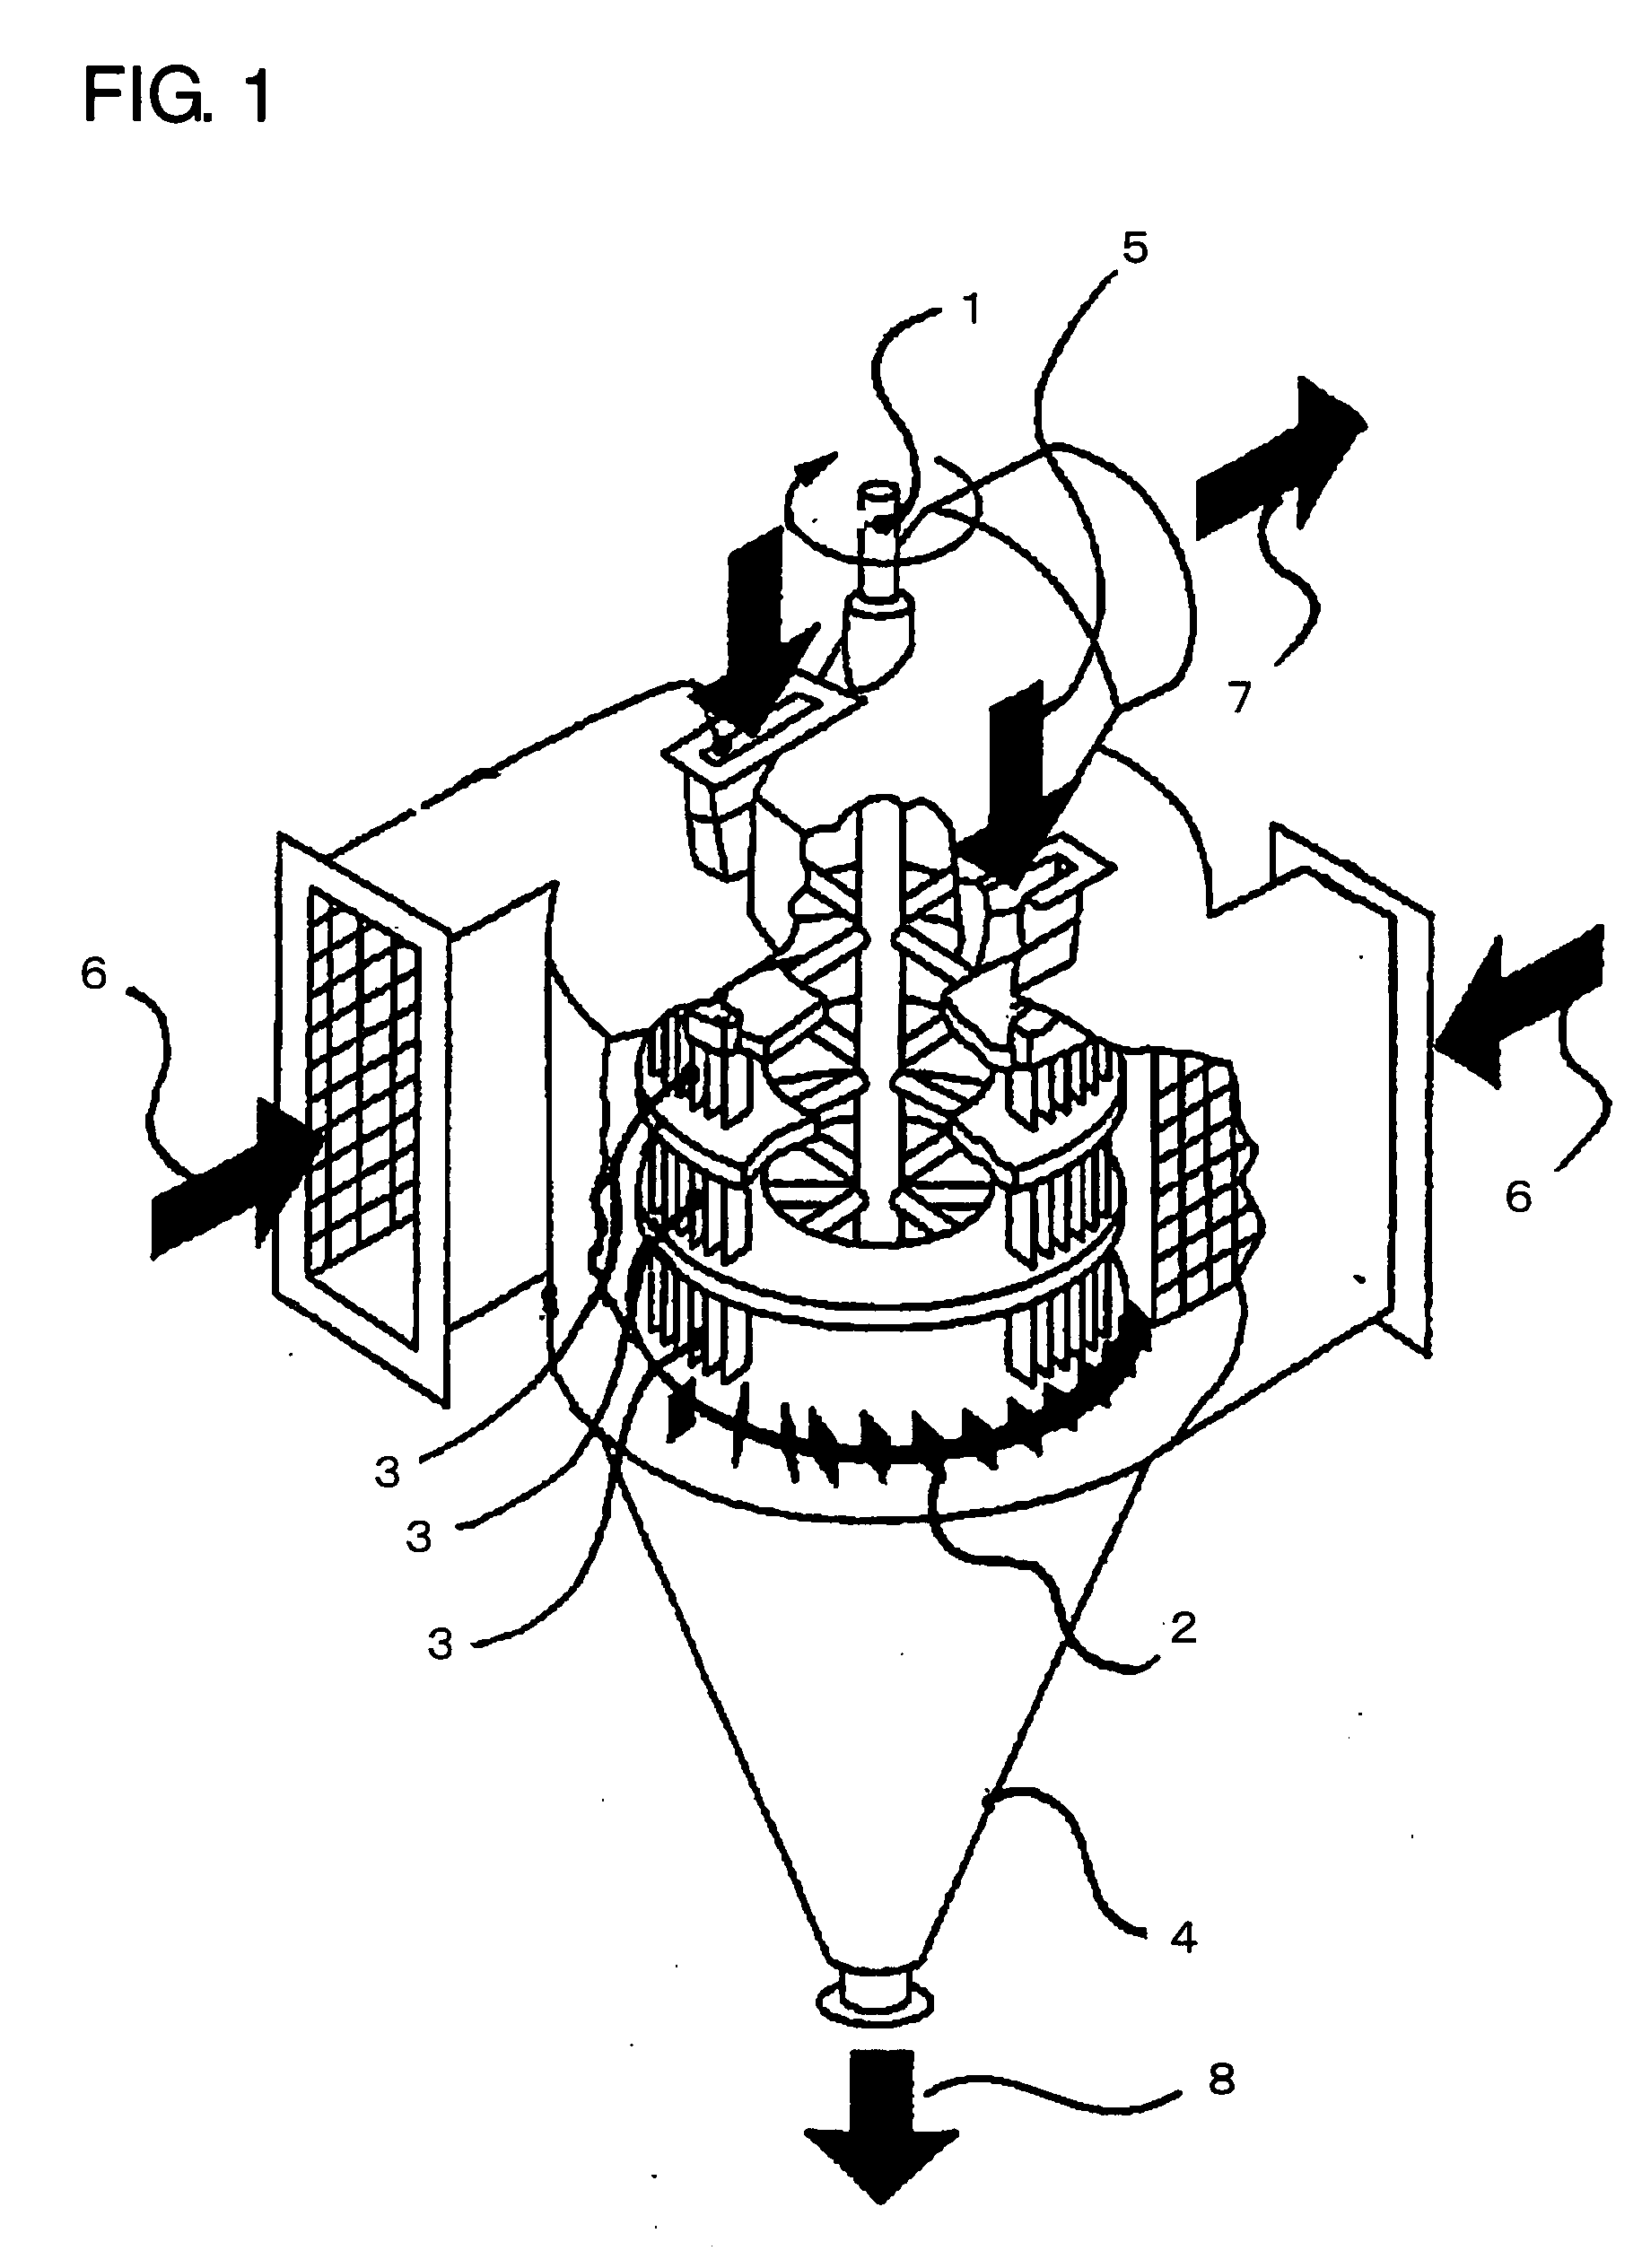 Method of Separating Foreign Particles